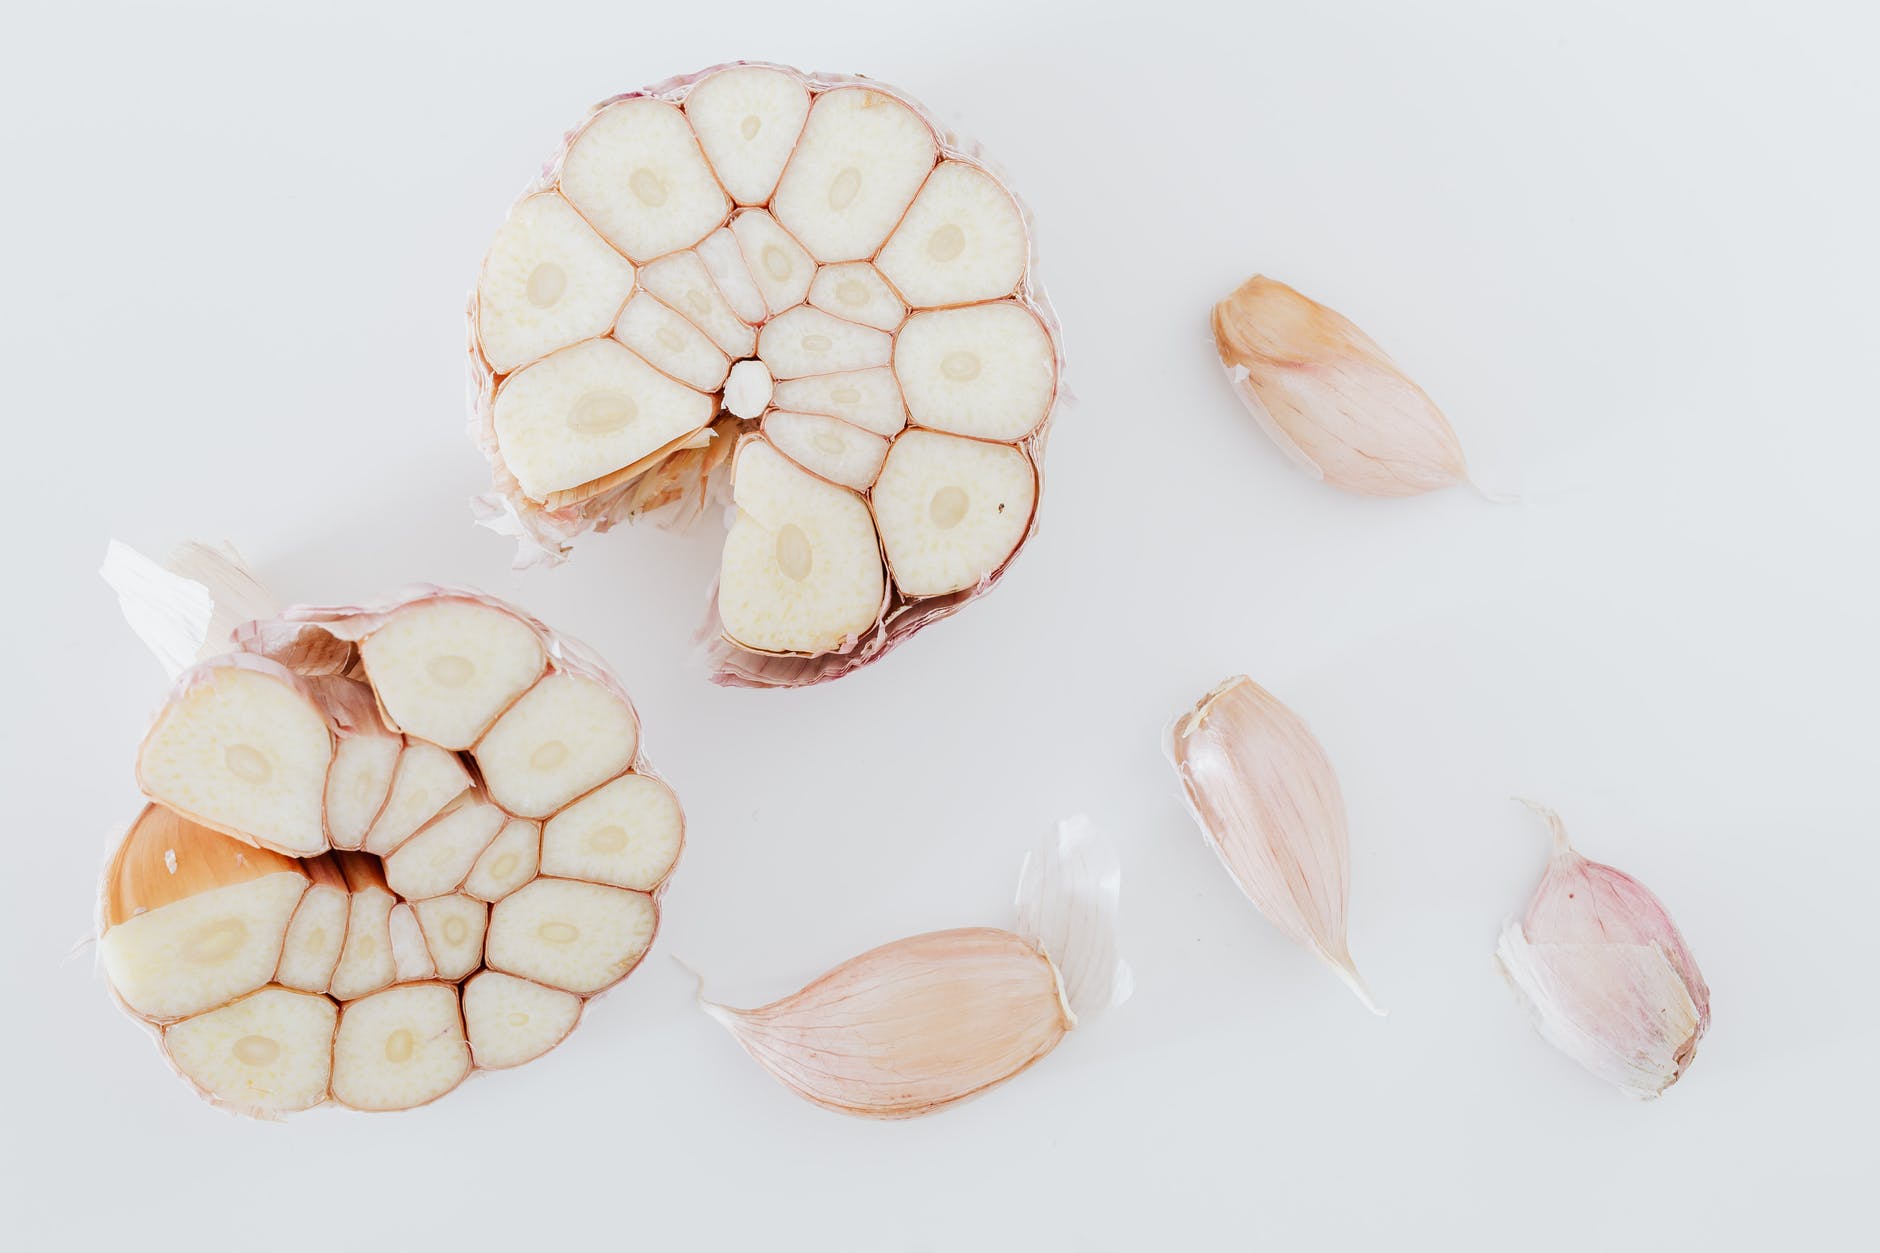 composition of cut in half and pieces of garlic